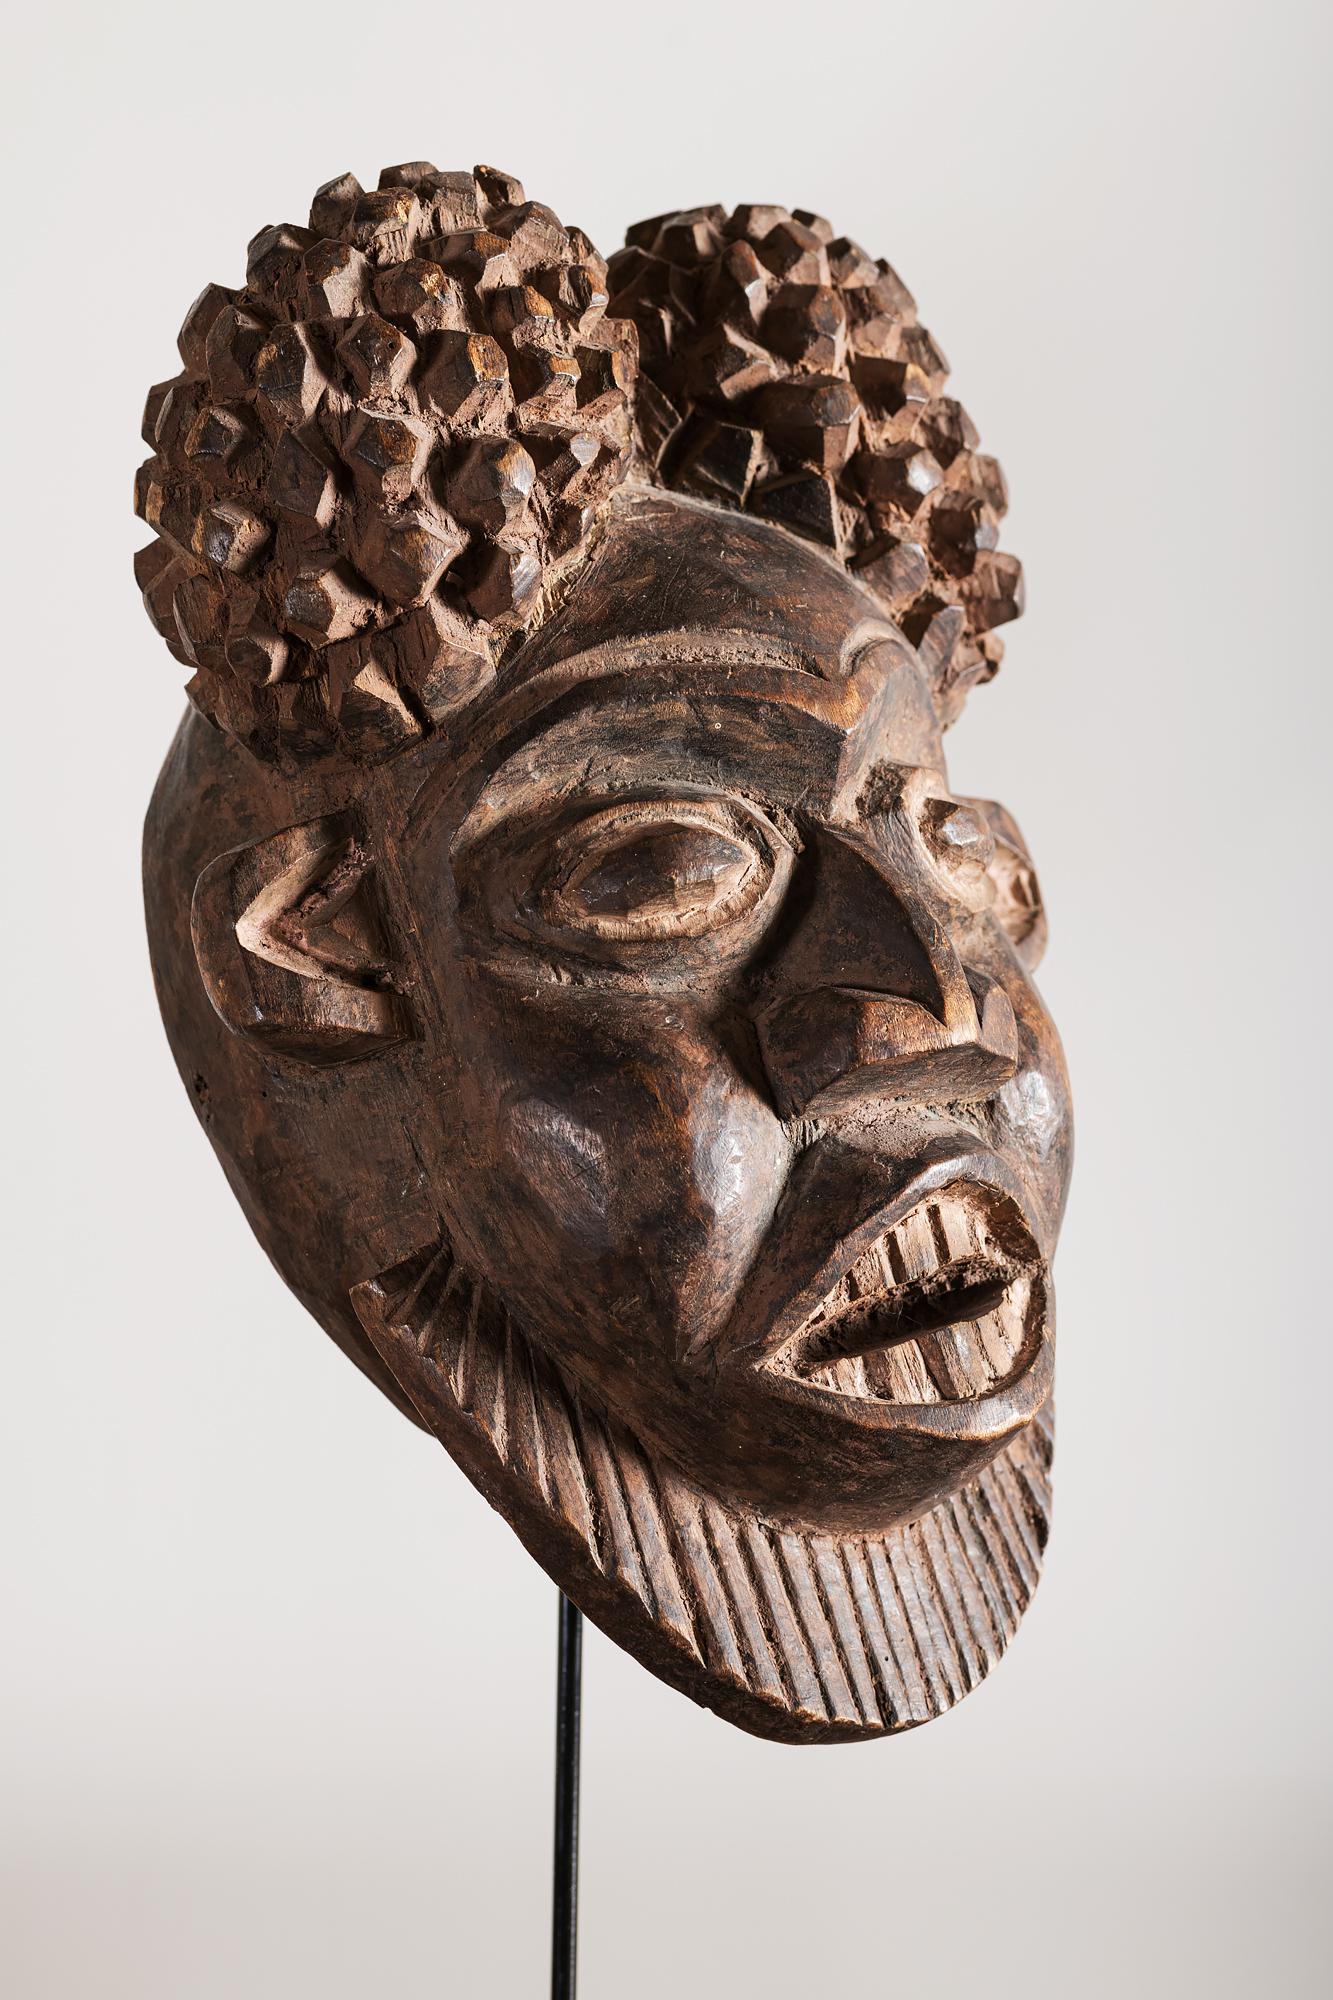 Tribal Decorative African Mask, Cameroon, 1950s